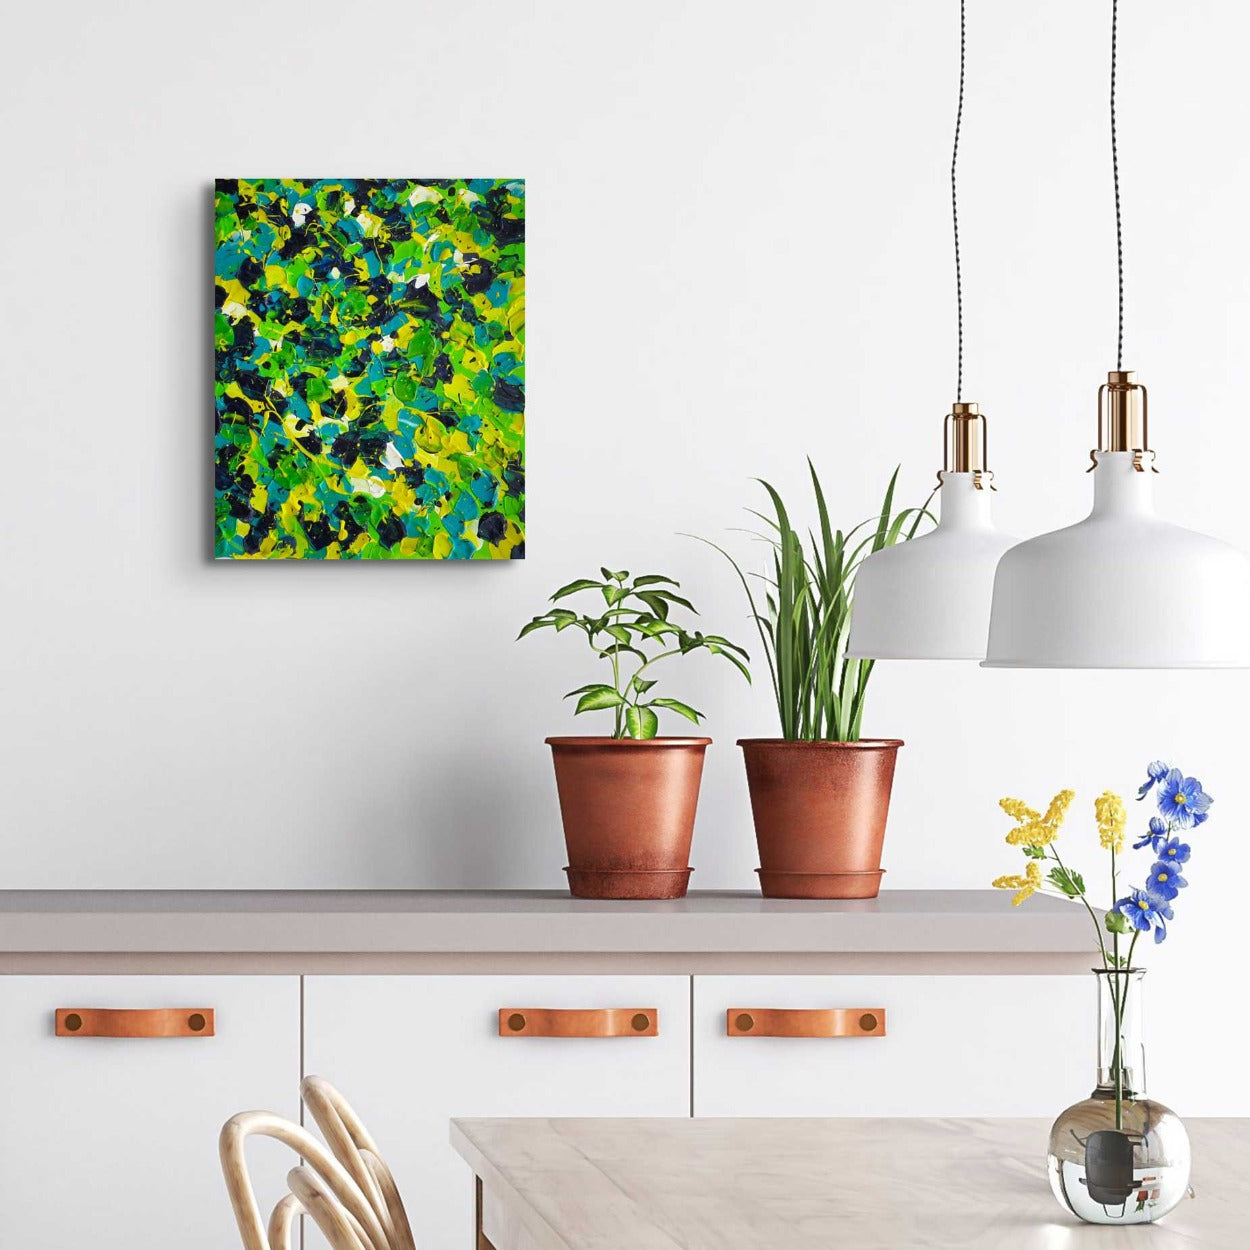 Avocado Smash heavily textured abstract in the colours of smashed avocado seen hanging in situ in kitchen. Original painting by Bridget Bradley